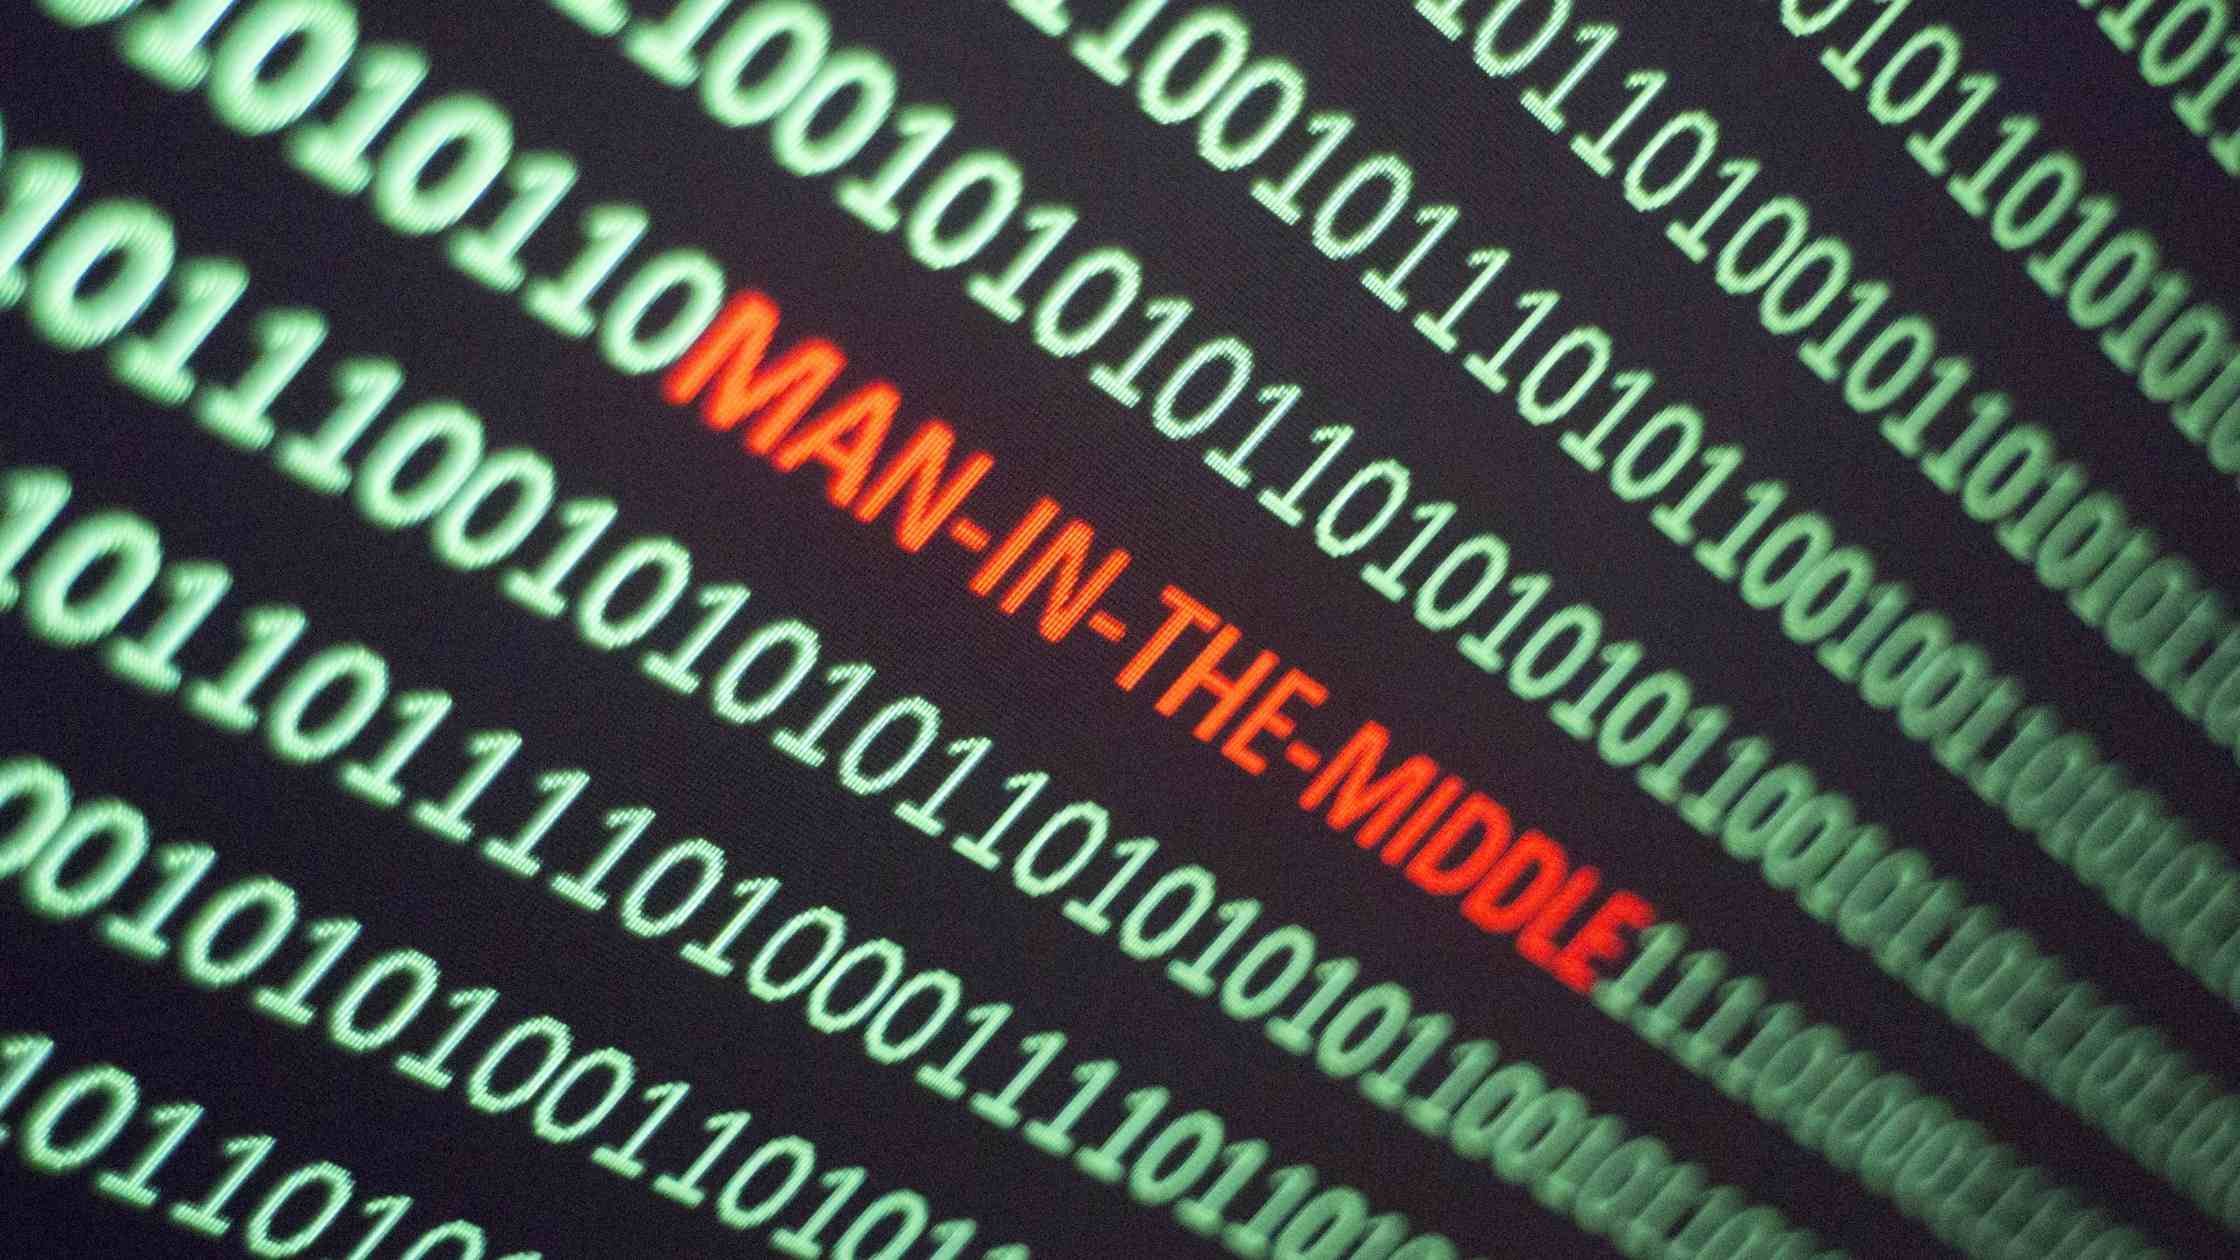 Man-in-the-Middle in a string of  binary code